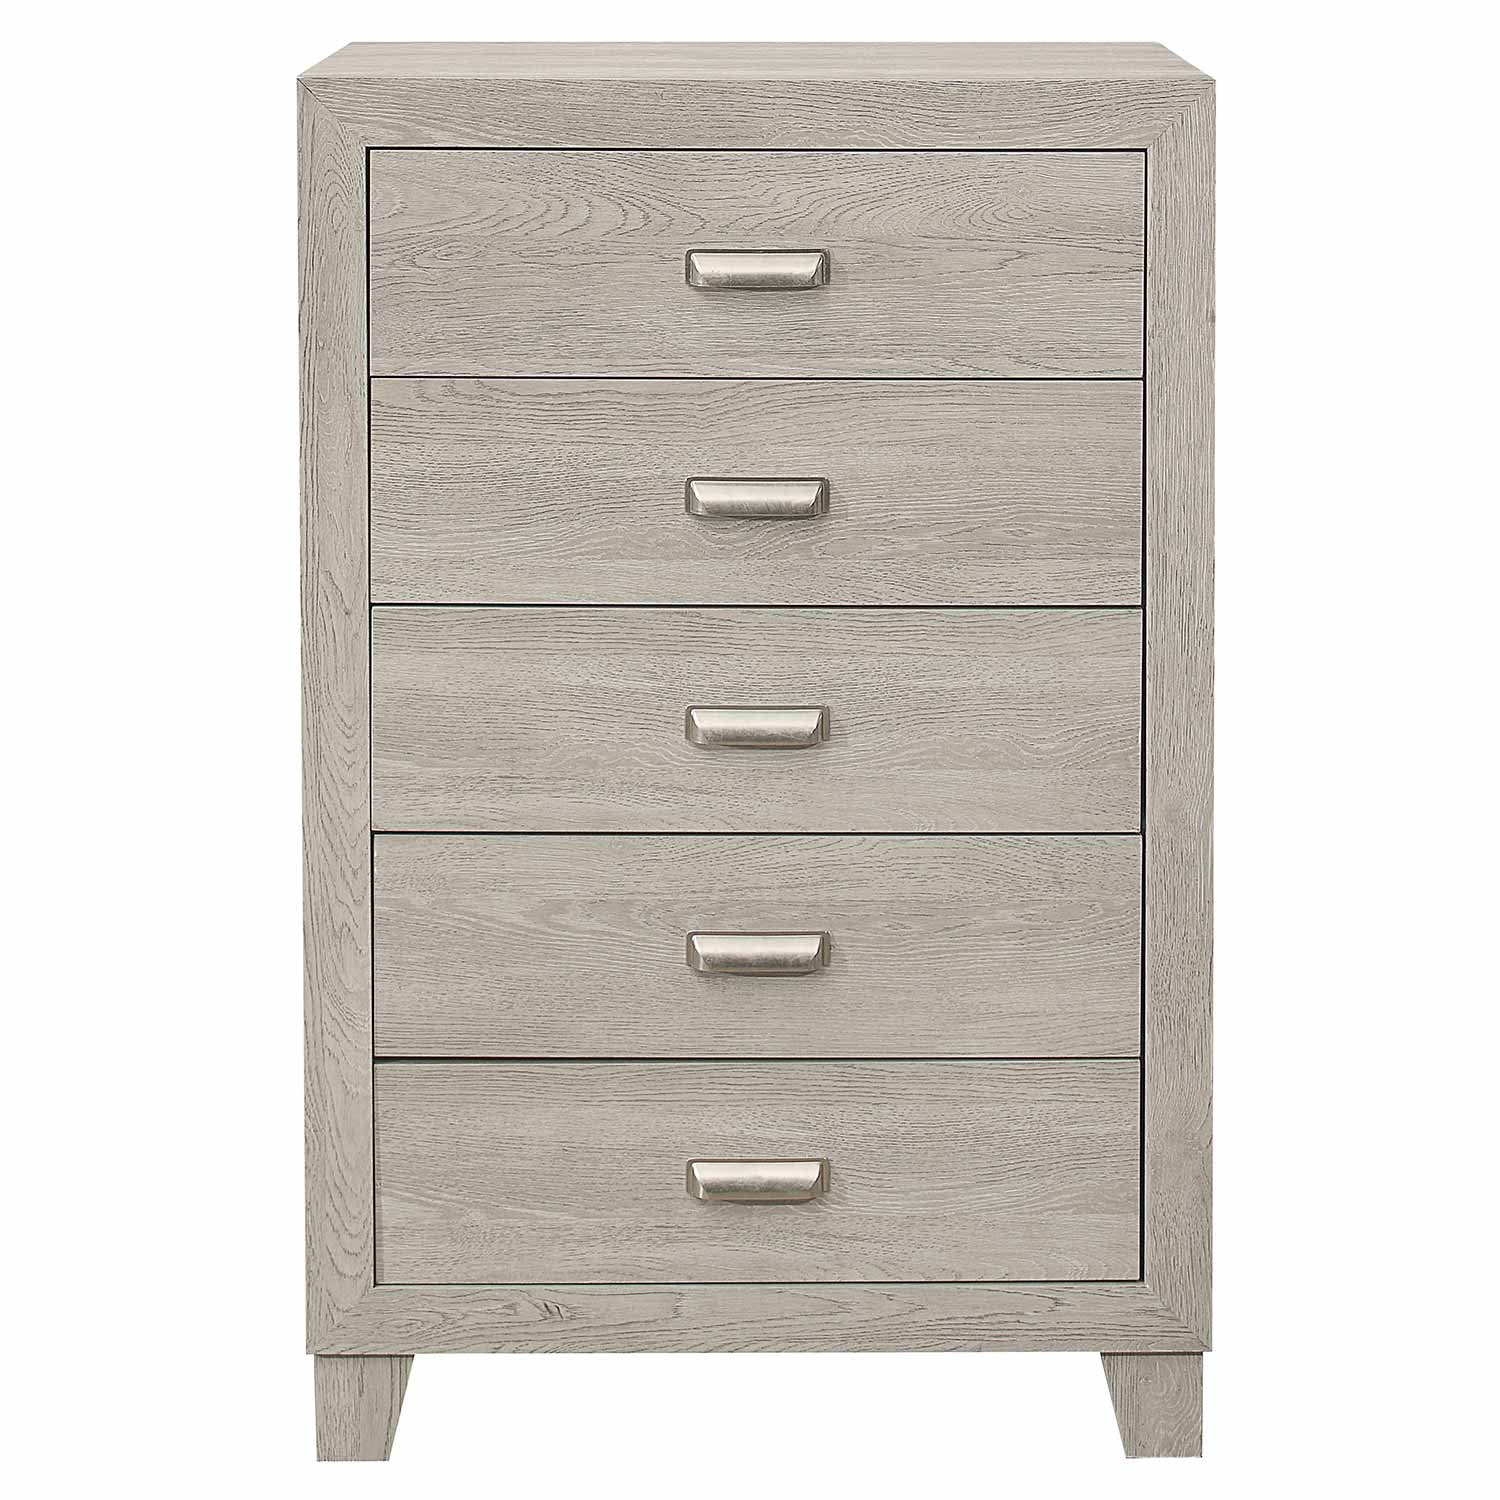 Homelegance Quinby Chest - Light Gray